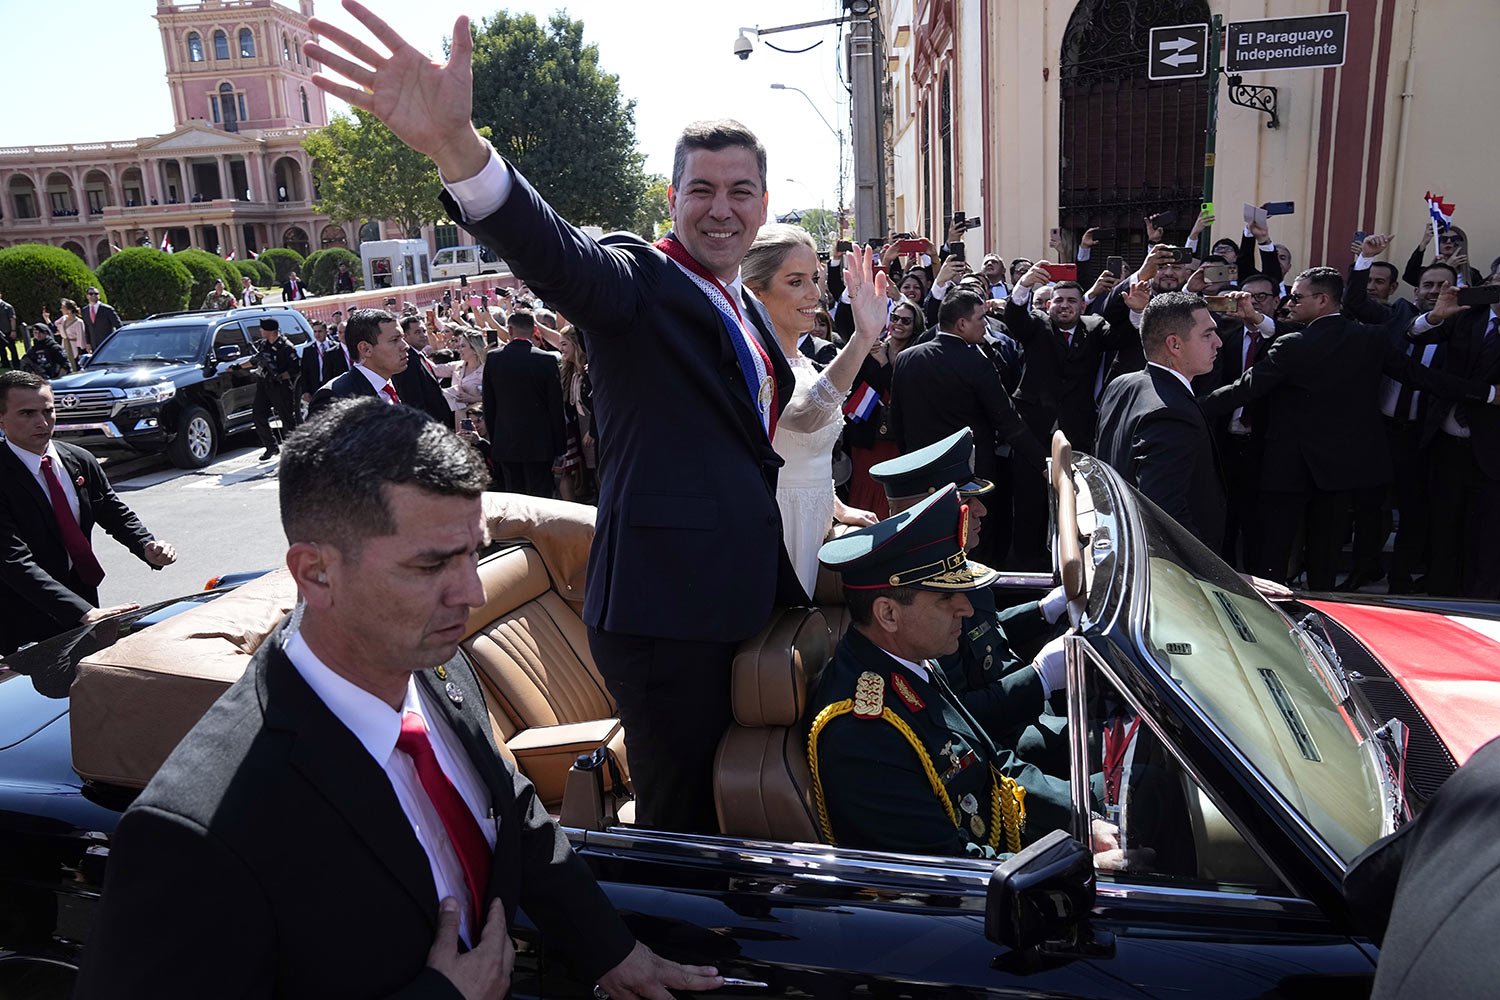  Paraguay's newly sworn-in President Santiago Pena and wife Leticia Ocampos wave on their way to the Cathedral on Pena's inauguration day in Asuncion, Paraguay, Aug. 15, 2023. (AP Photo/Jorge Saenz) 